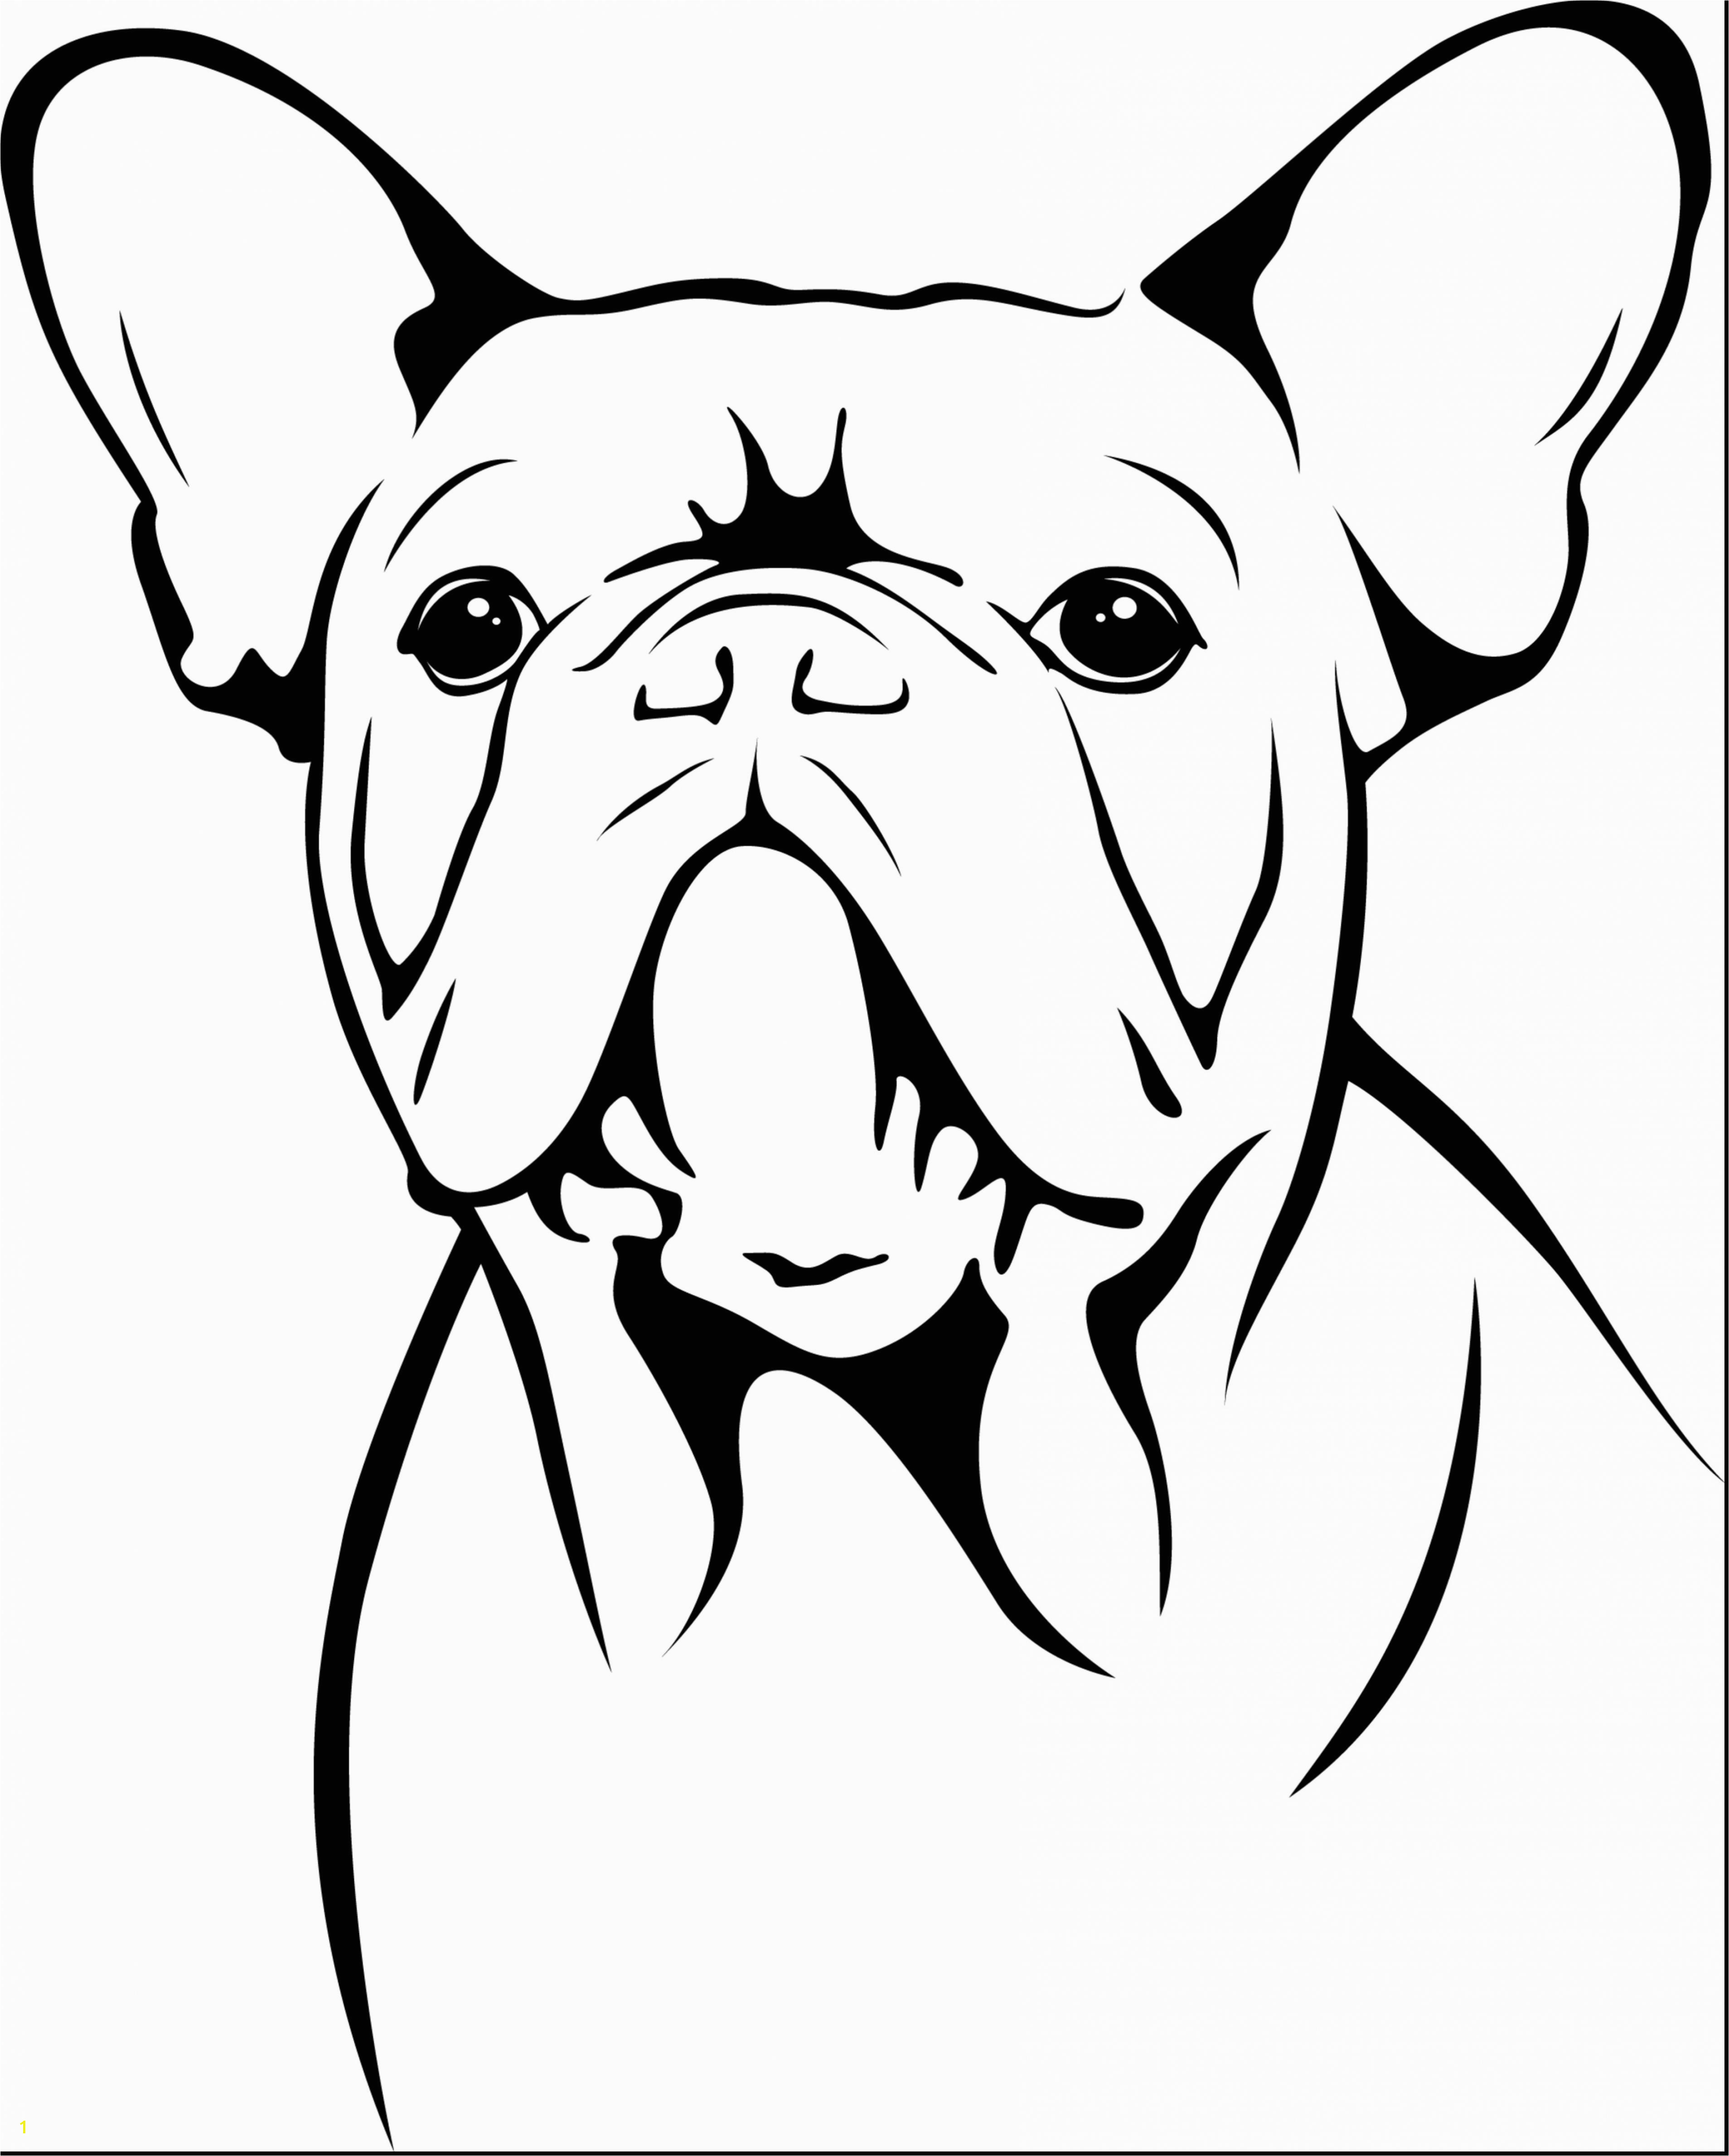 Bulldog Coloring Pages Beautiful Cool Od Dog Coloring Pages Free